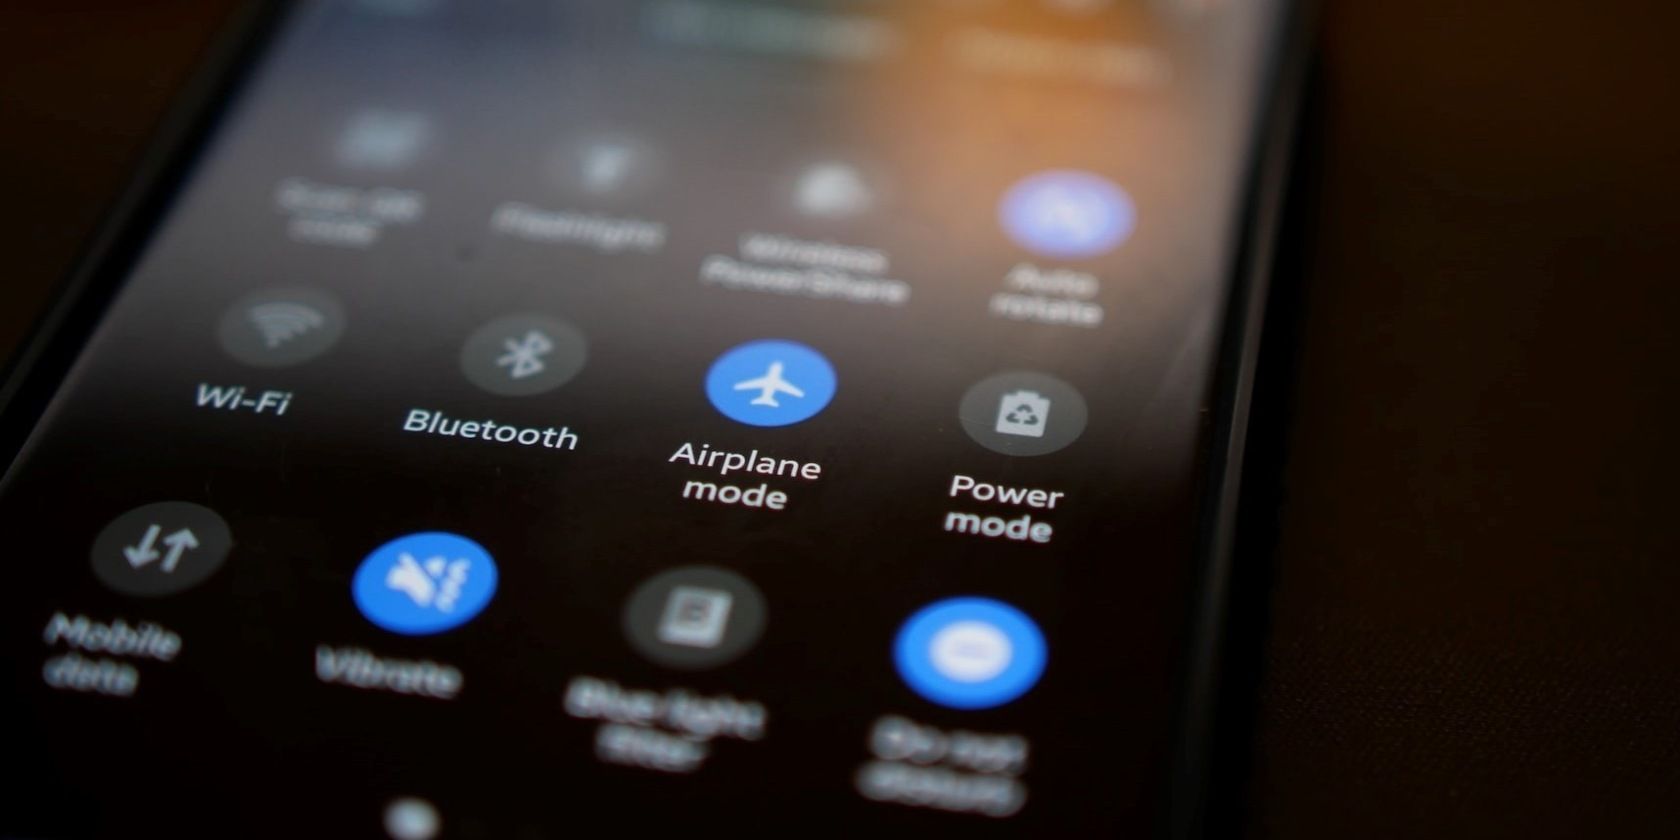 Android Quick Settings menu showing Bluetooth, Airplane mode and other toggles